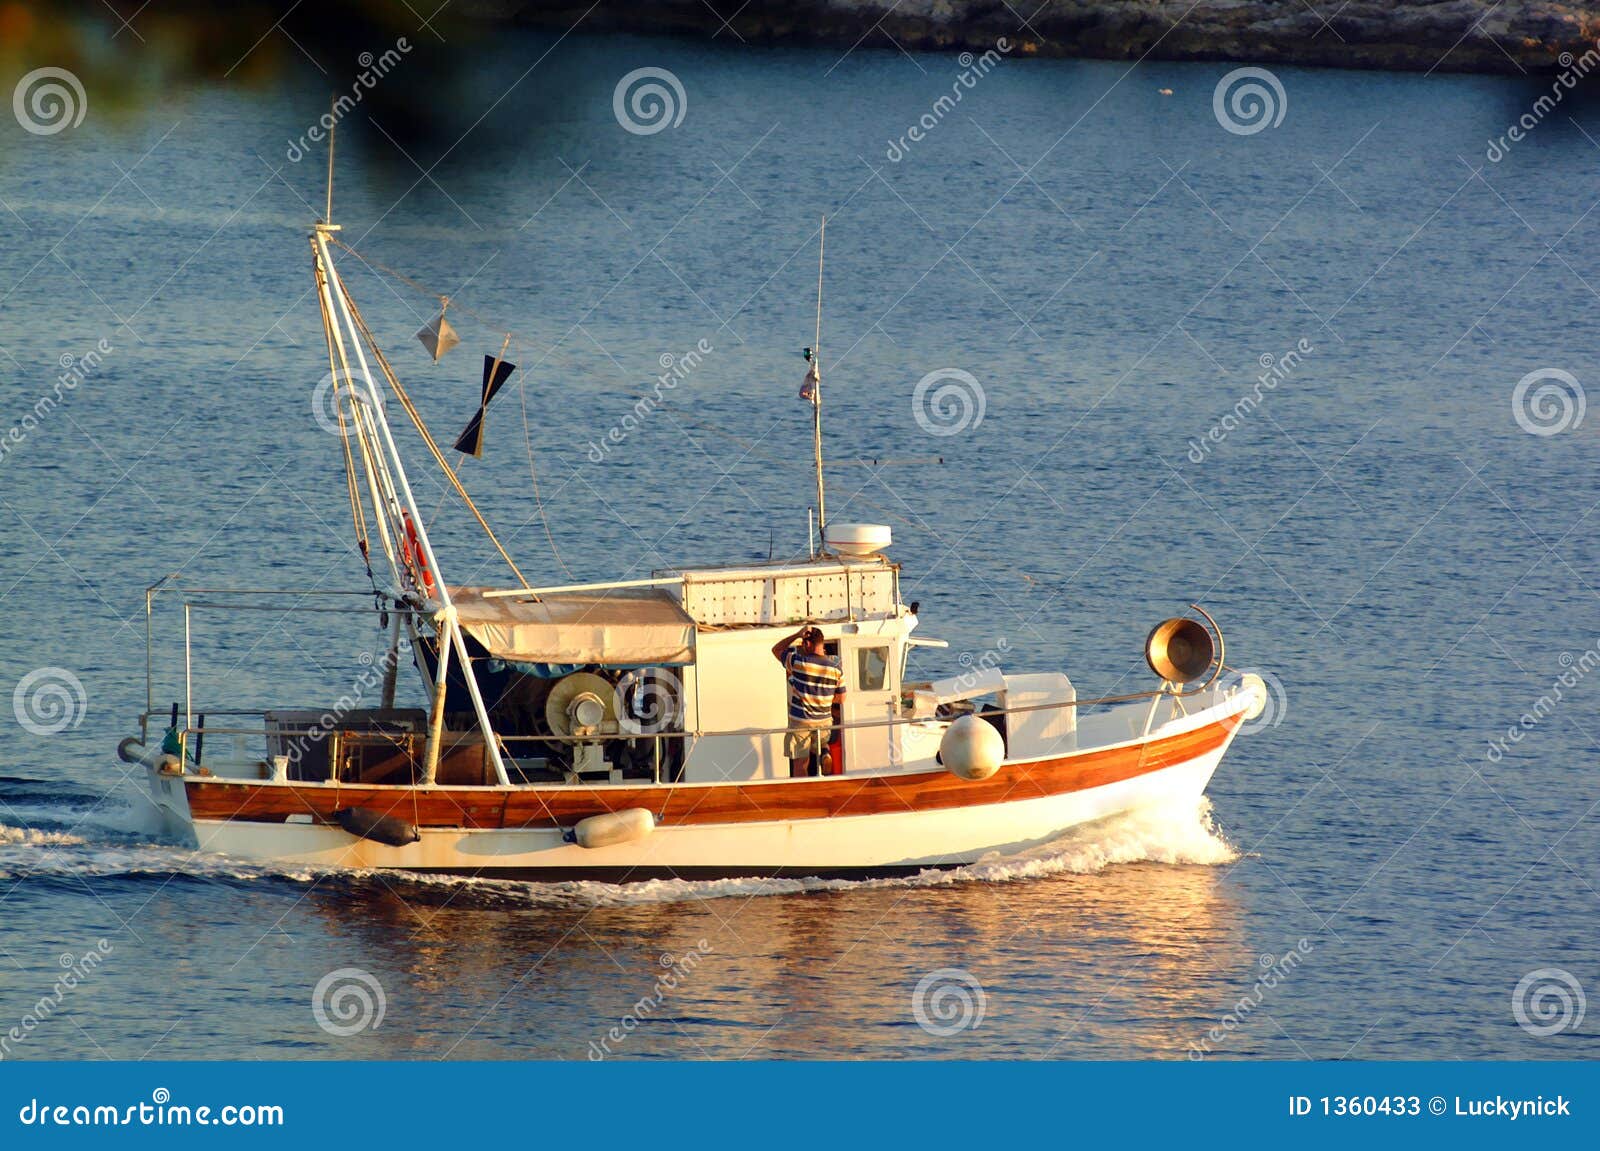 Fishing boat at sea stock image. Image of ship, commercial ...